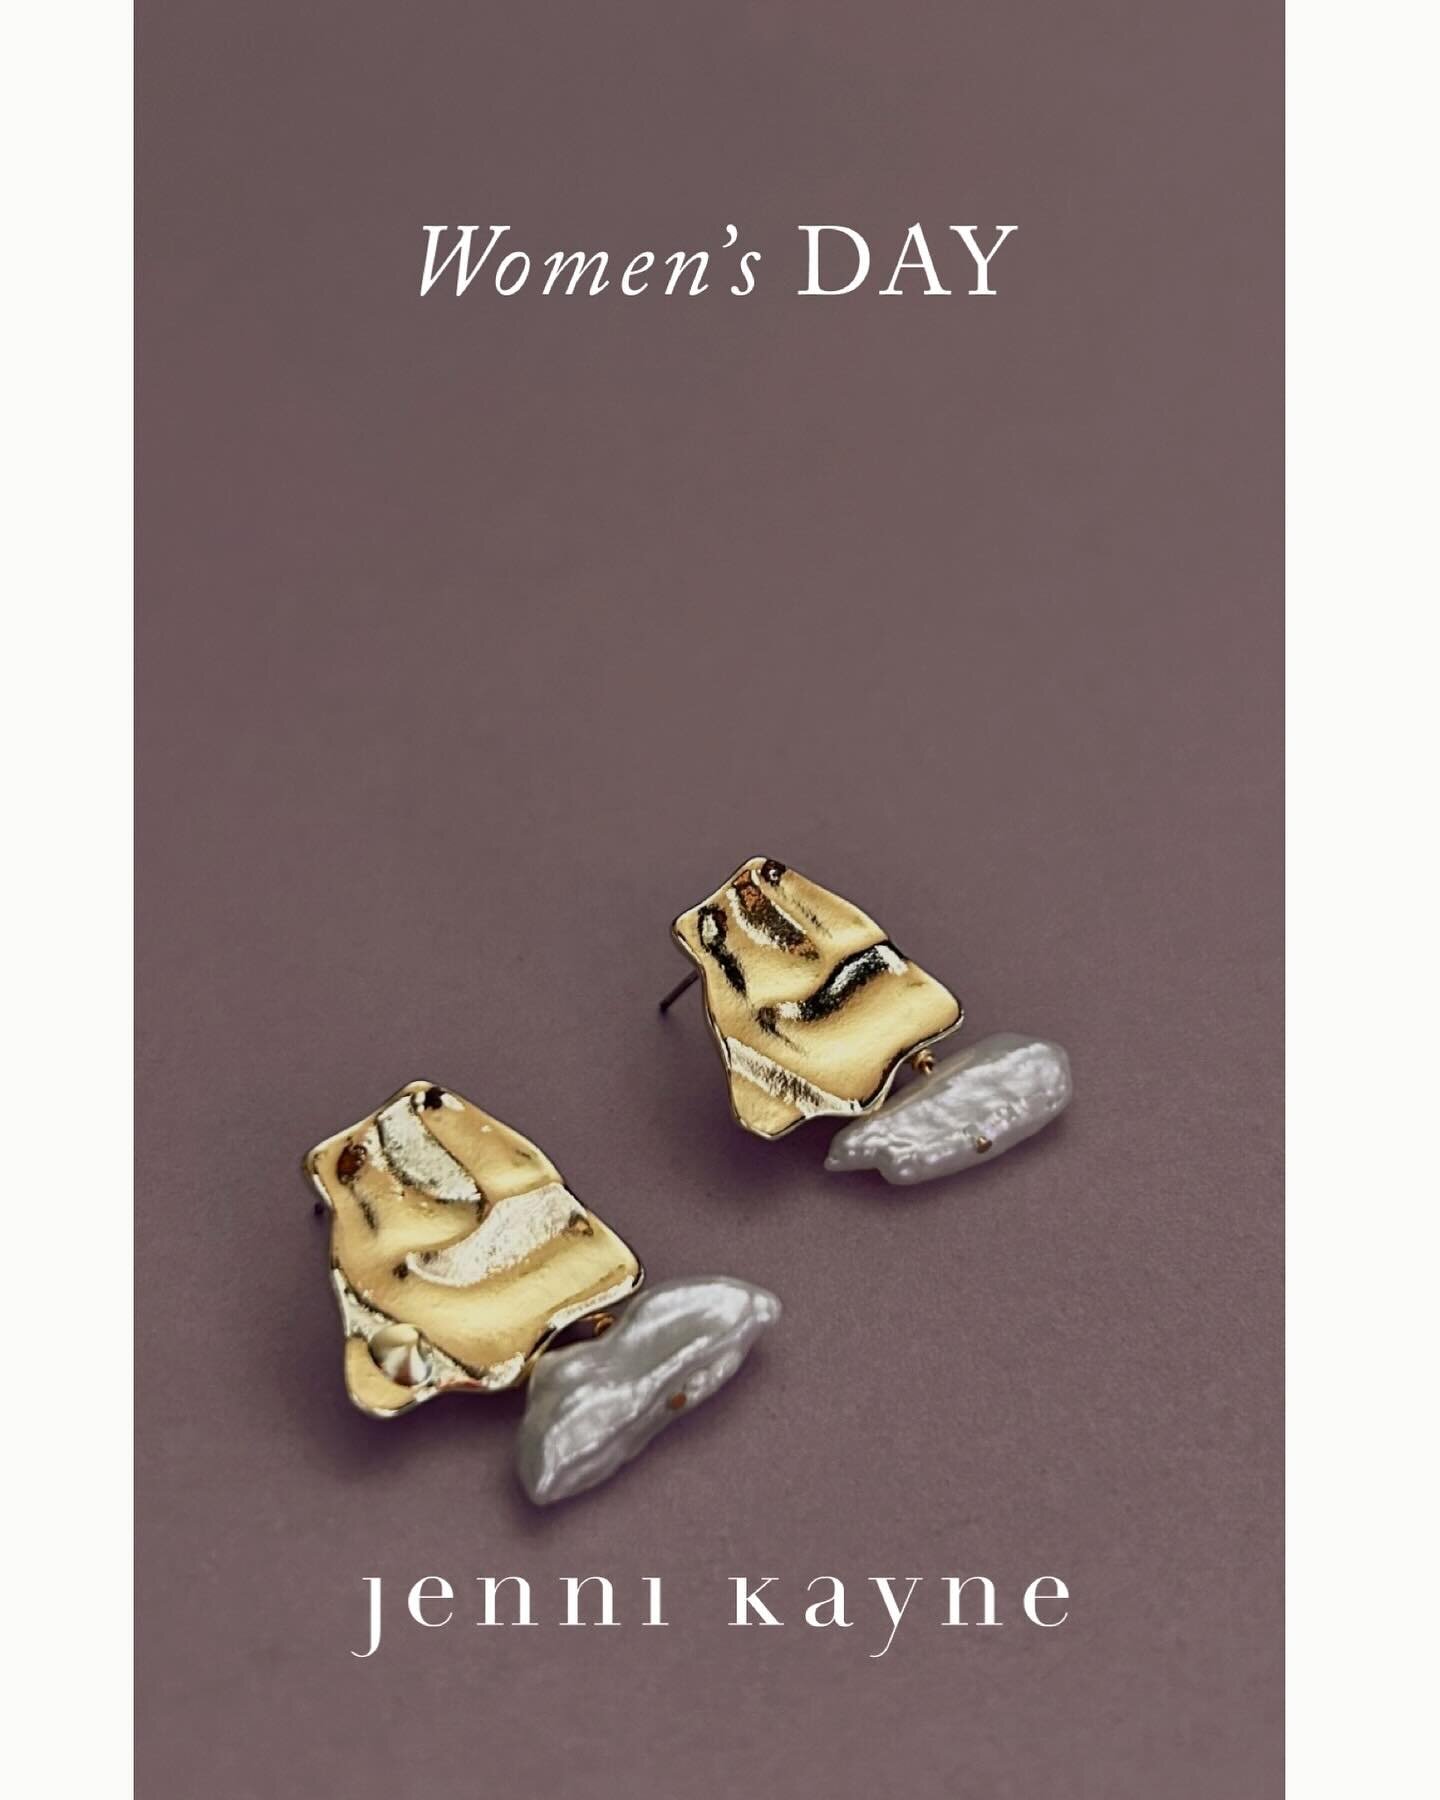 Seattle! My jewels and I will be popping up w @_therookery at @jennikayne at the u village Friday, March 8th. Mark your calendars and come say hi!
1PM - 6PM
Jenni Kayne Seattle
2610 NE Village Lane
Seattle, WA
RSVP TO
seattle@jennikayne.com